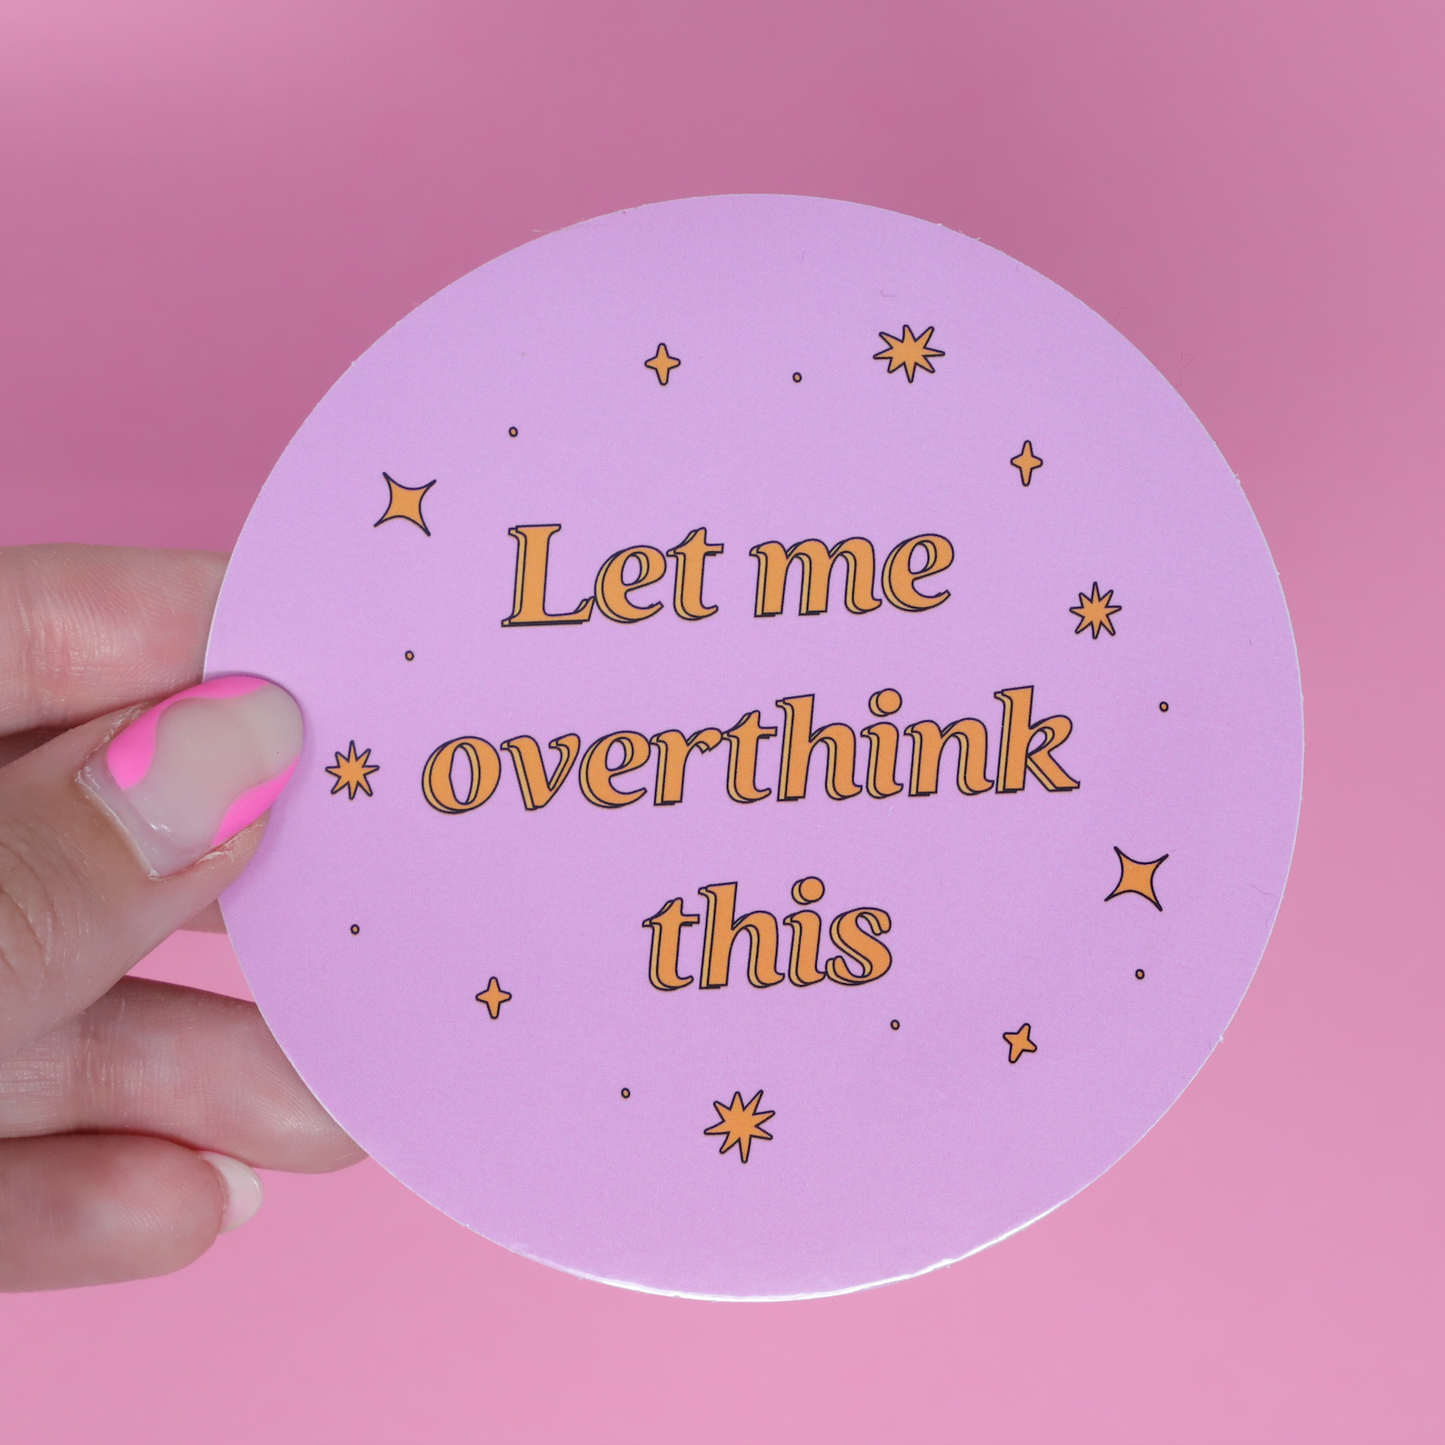 Let me overthink this Sticker